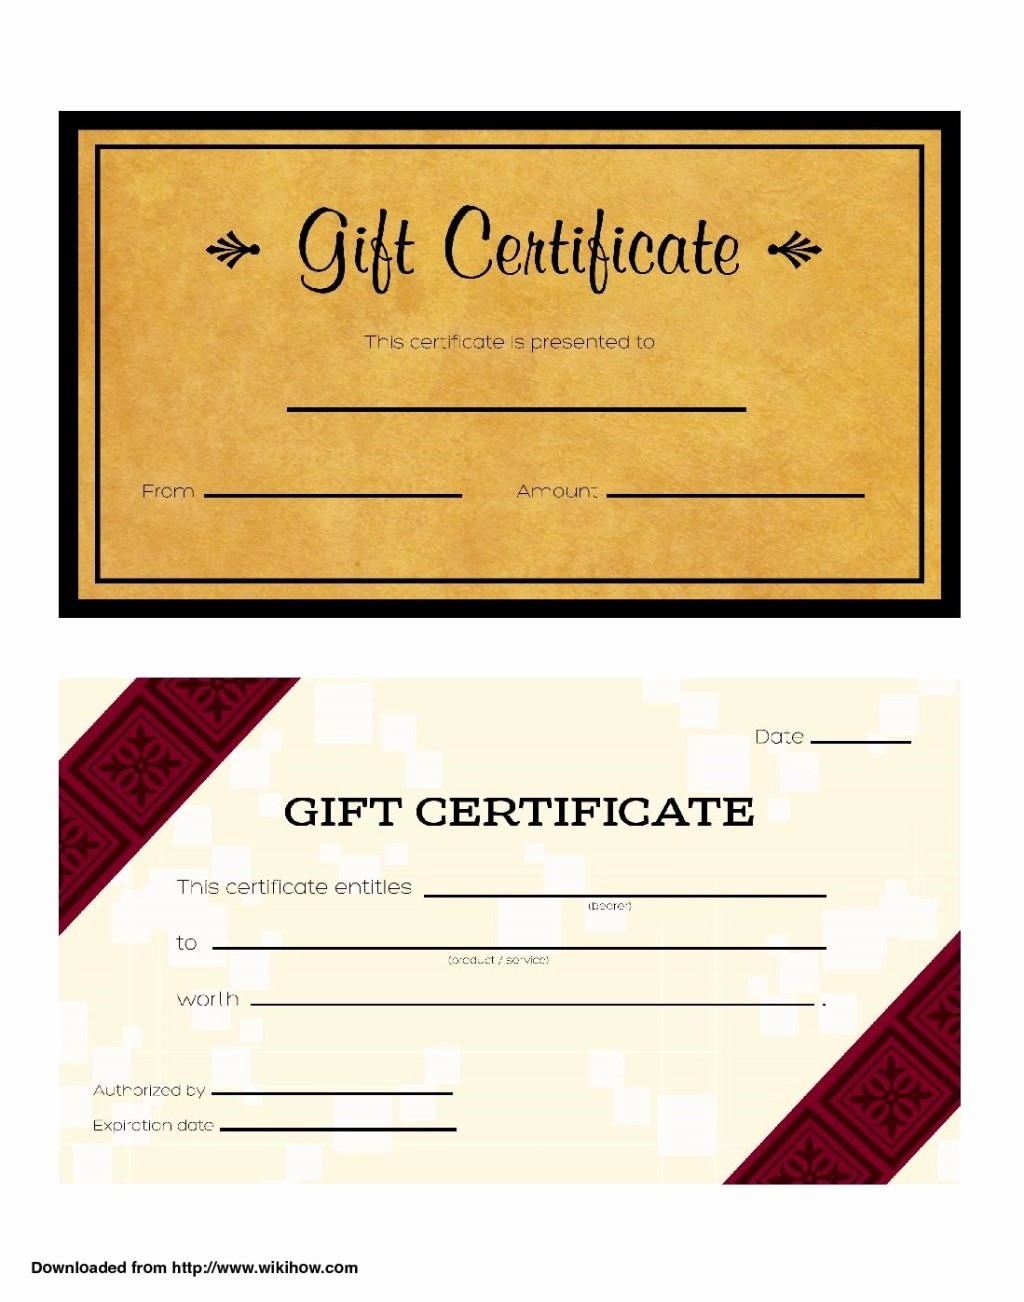 How to Design A Certificate Fresh Cool Design Of Business Gift Certificate Template Brown